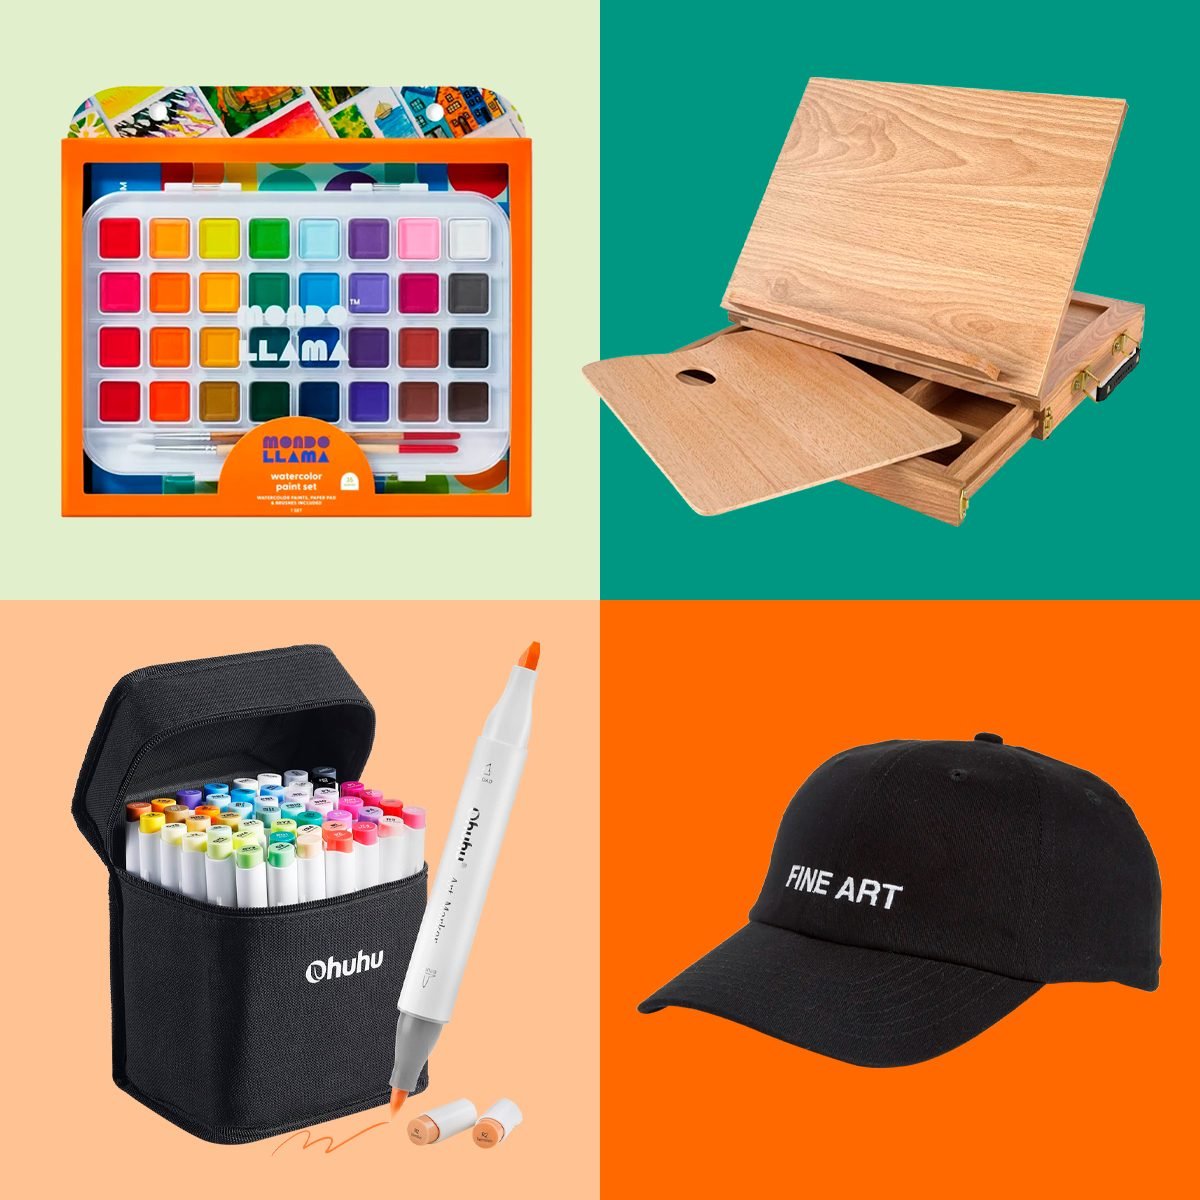 40 Best Gifts for Artists, According to Real Artists & Designers